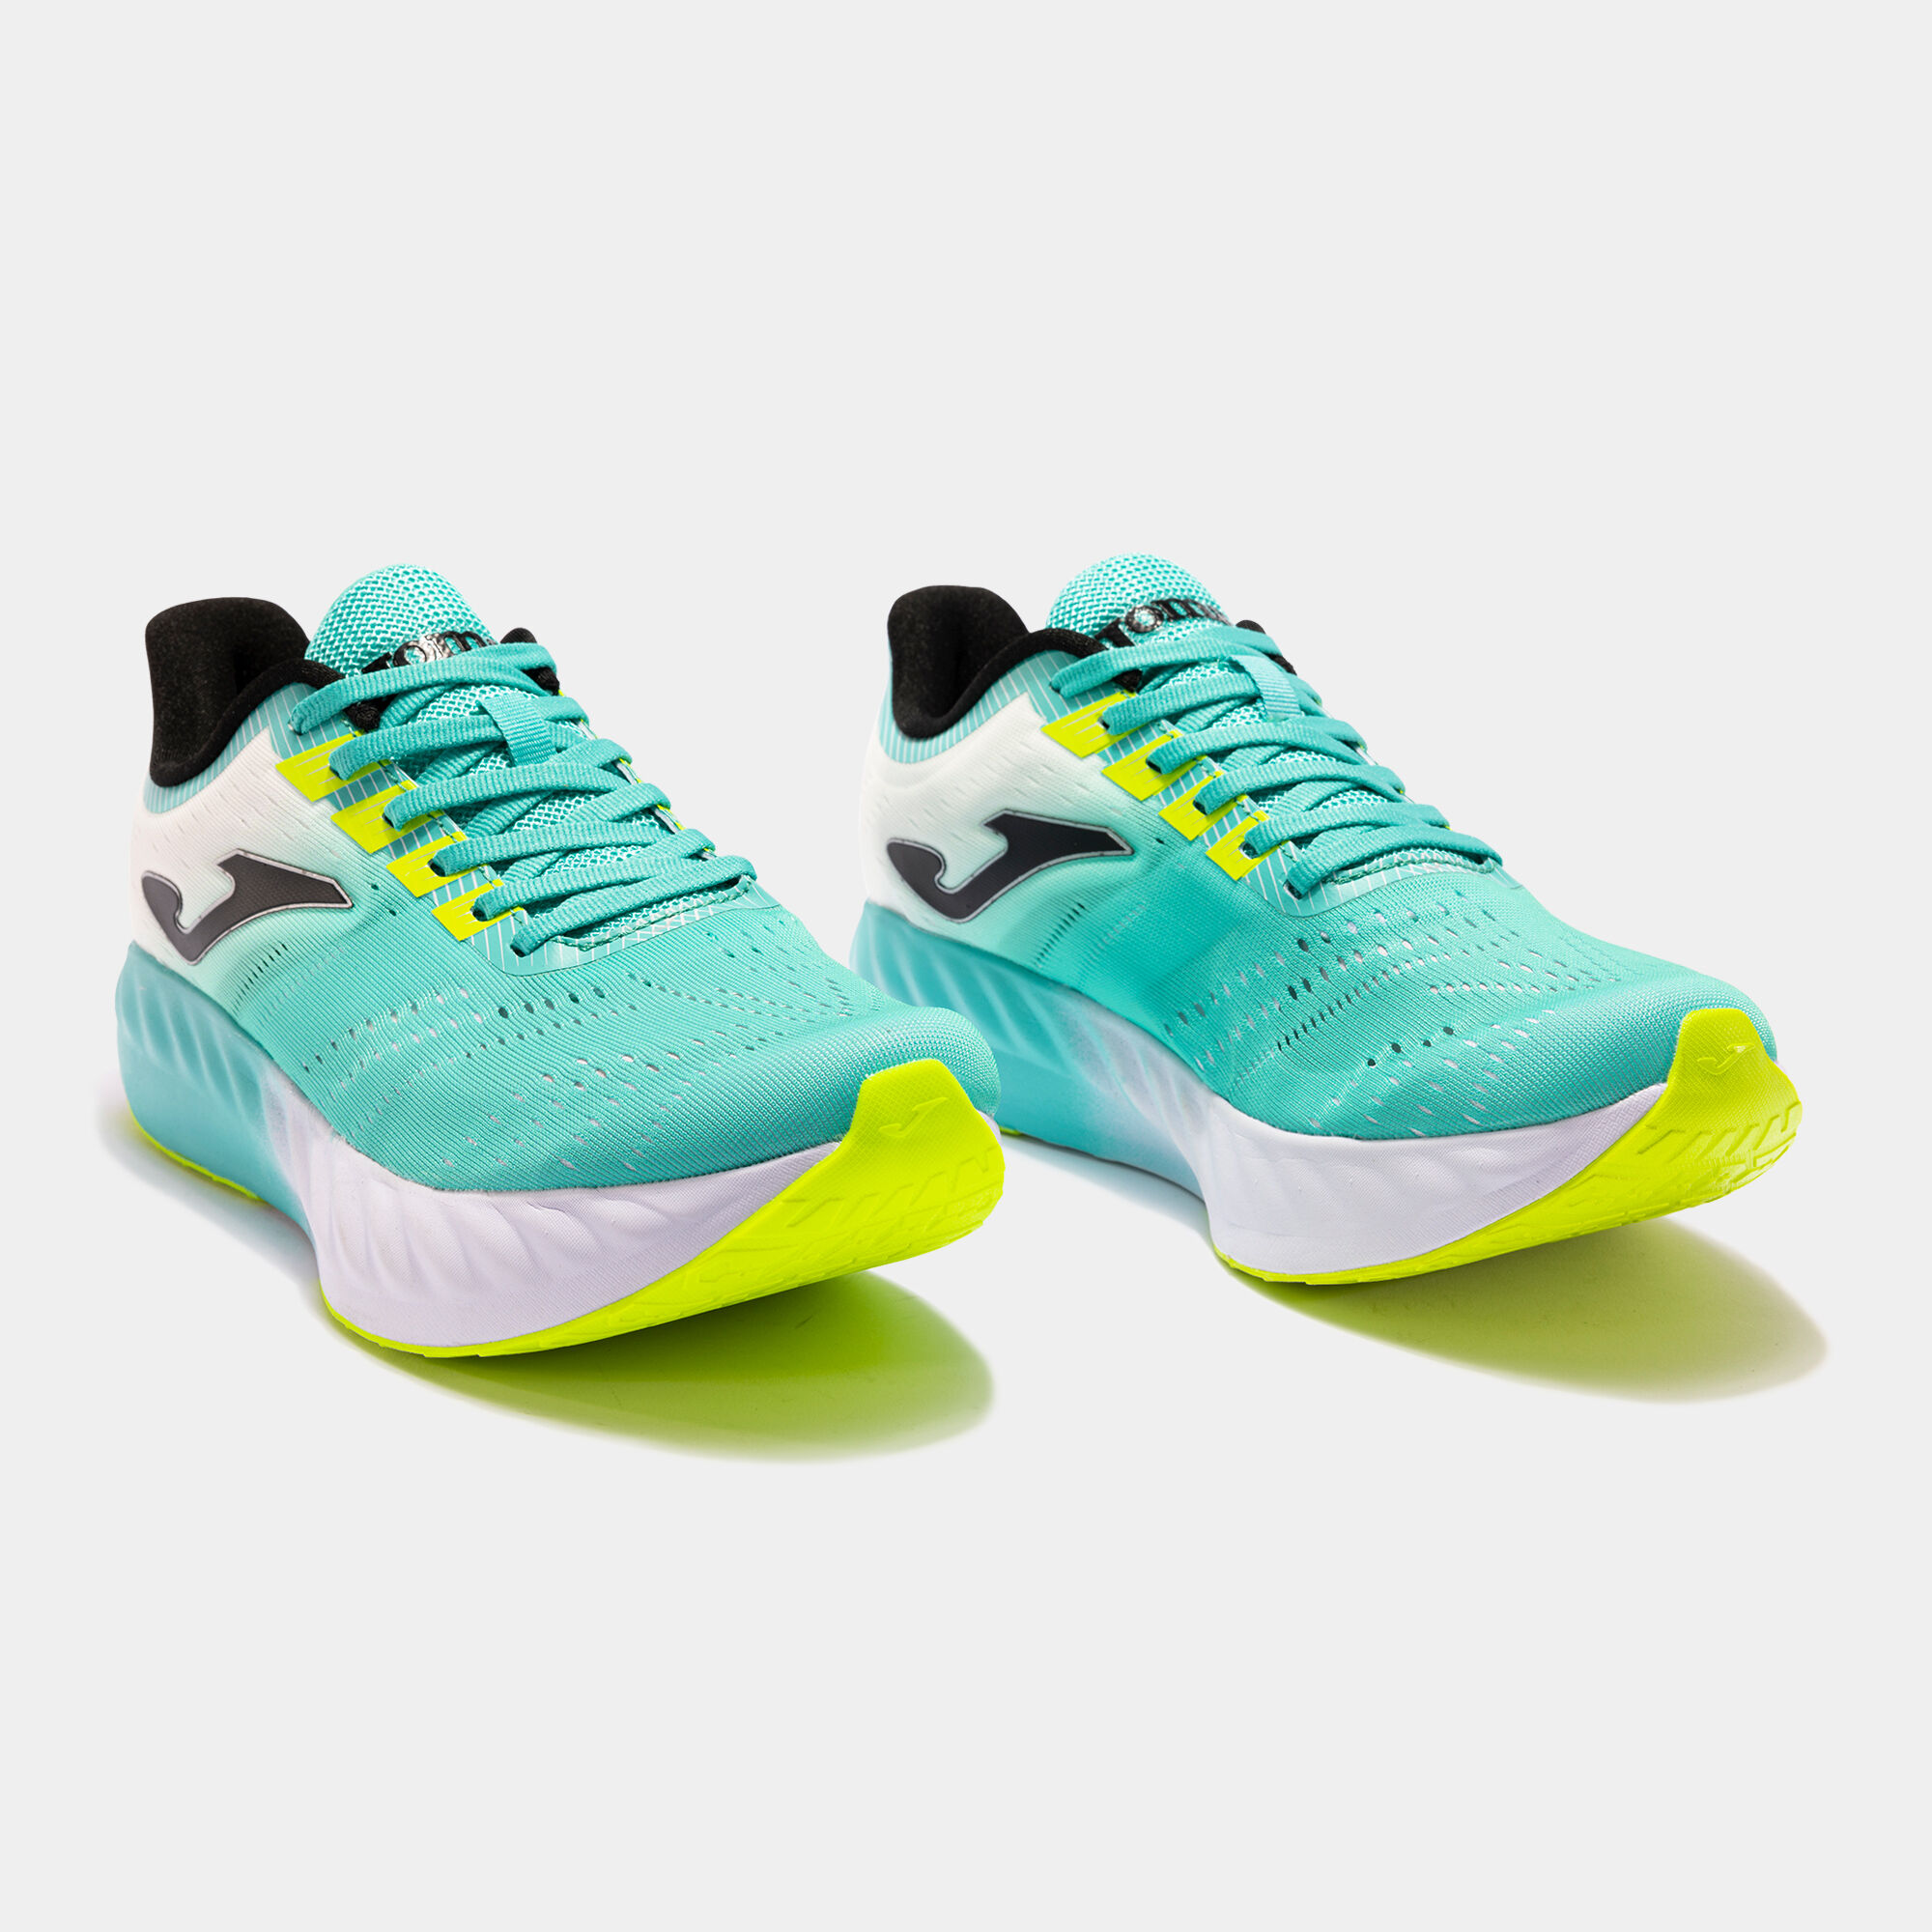 Chaussures running R.3000 23 unisexe turquoise